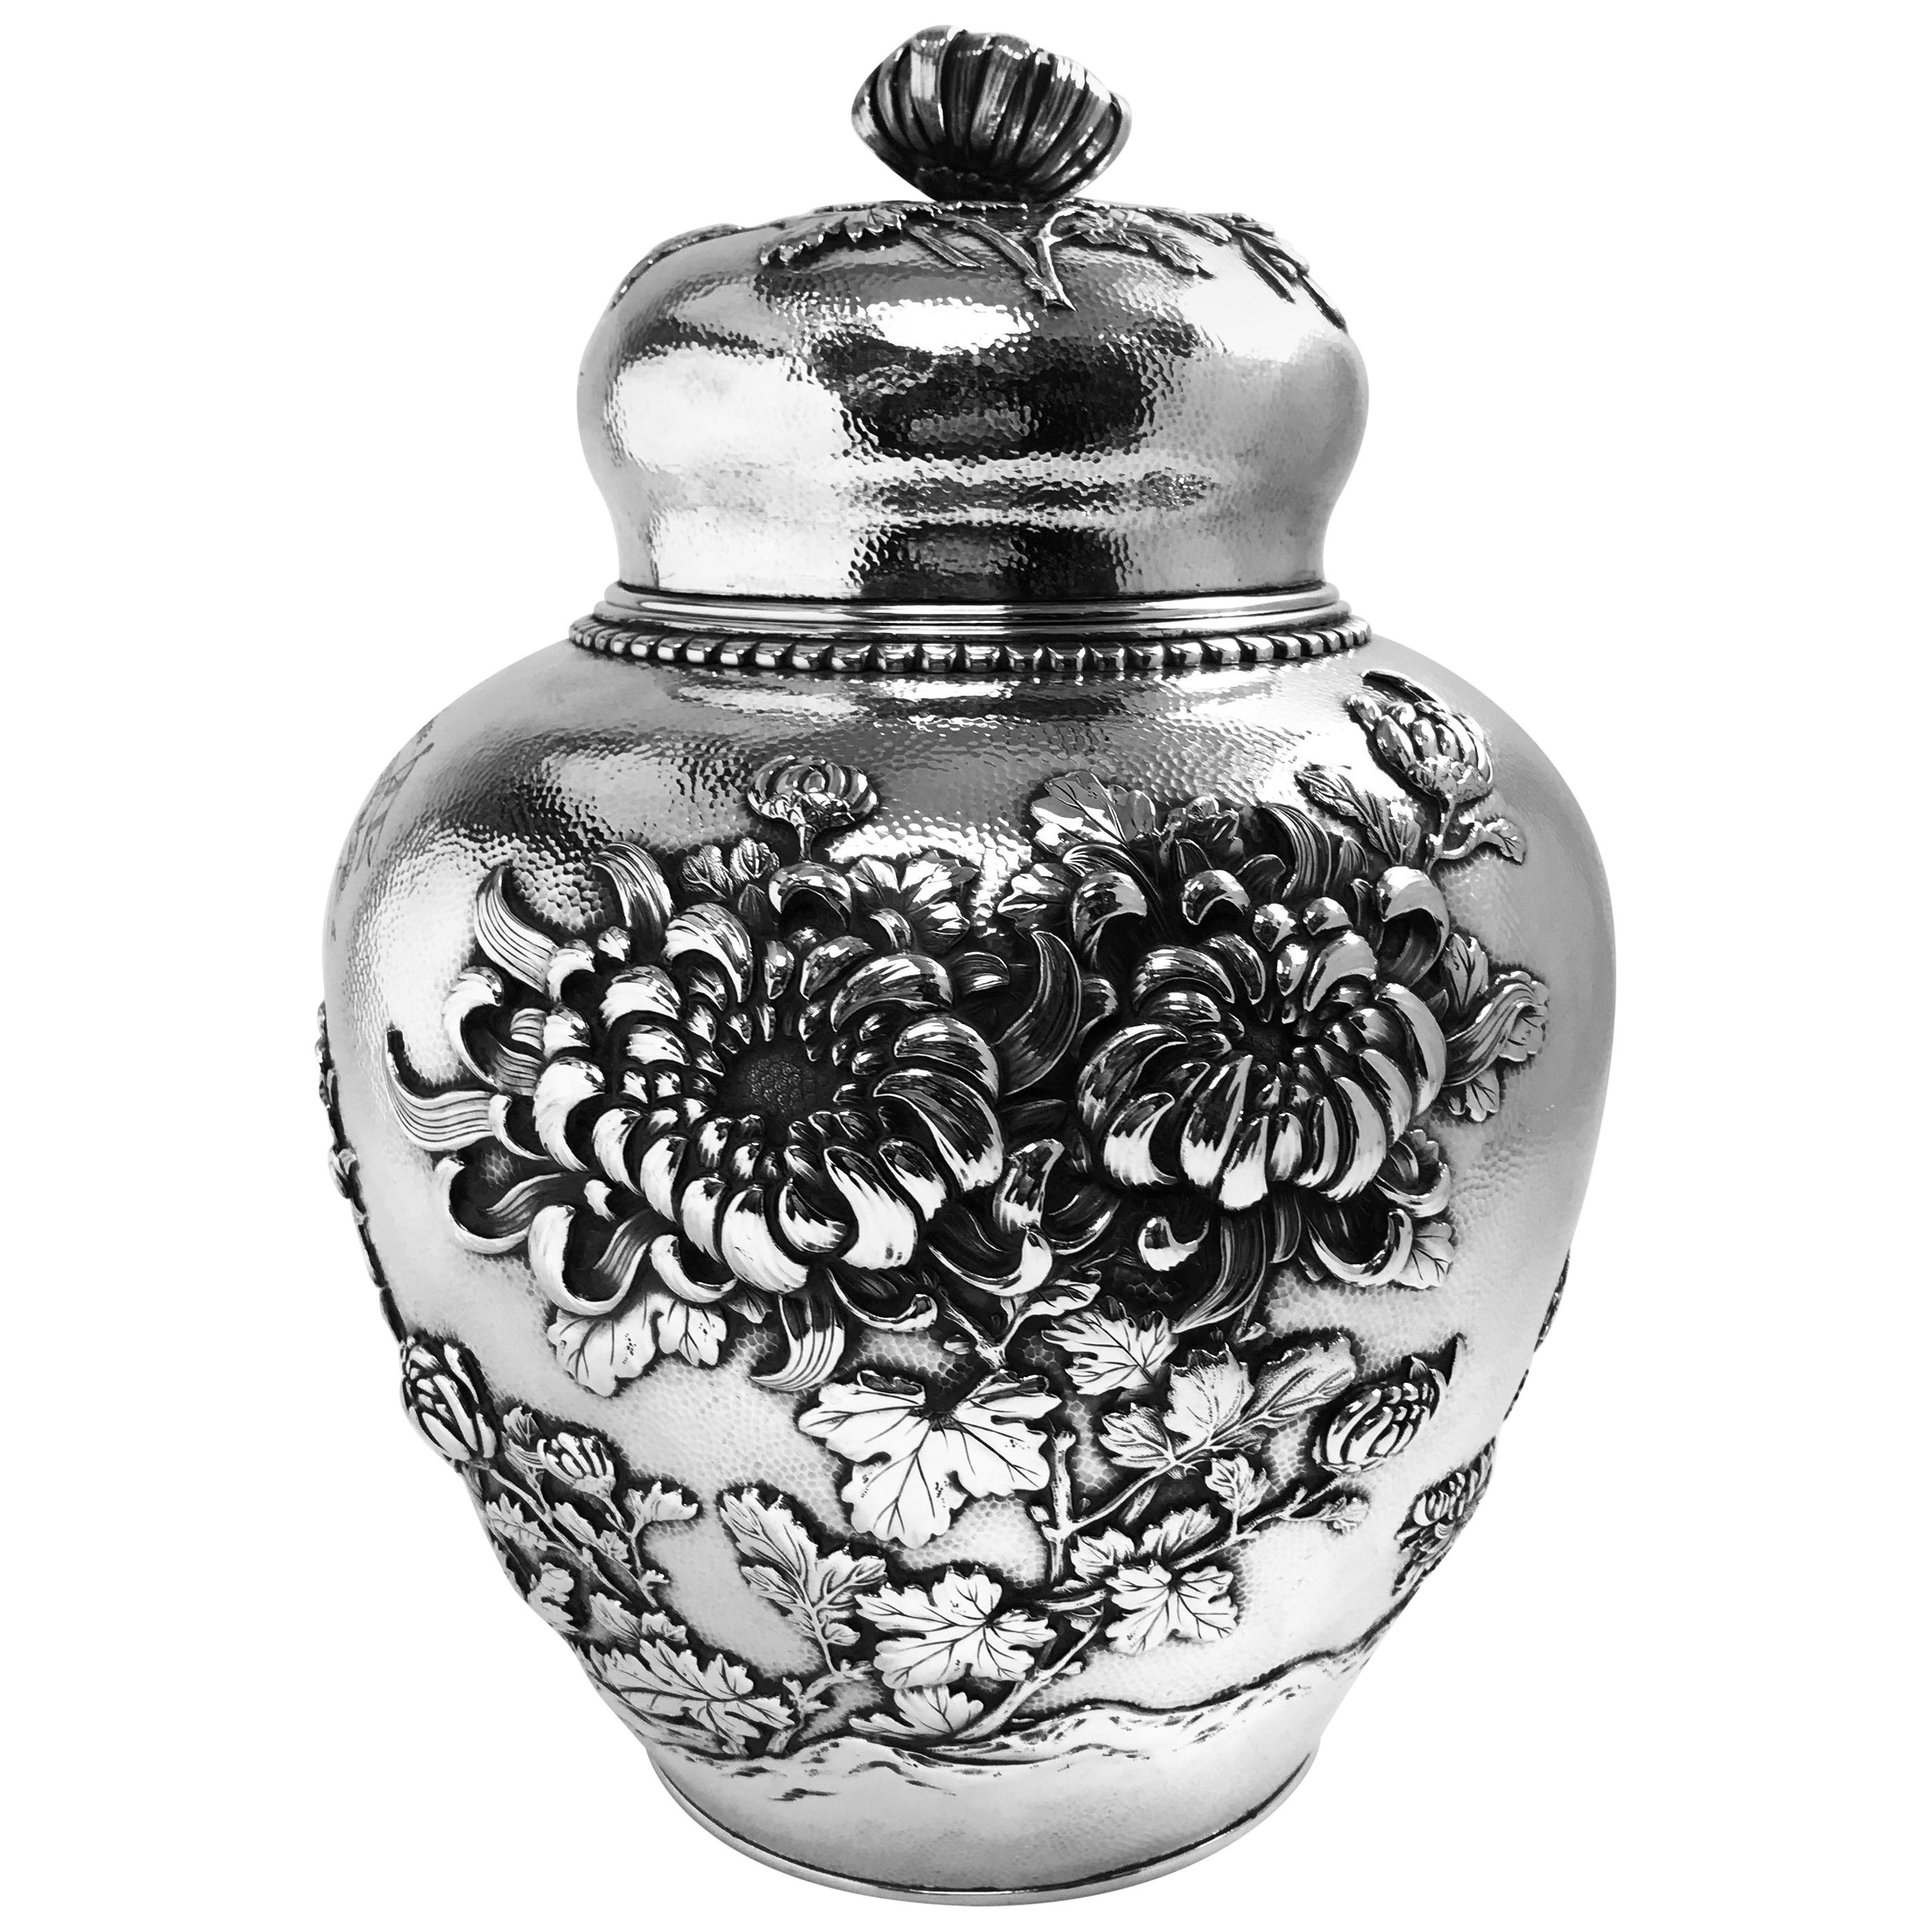 A large and important silver ginger jar made in Japan in the late Meiji period. It was sold in the port of Yokohama and the engraved inscription to one side indicates that it was bought as a gift from the officers and crew of the yacht Alcedo to the